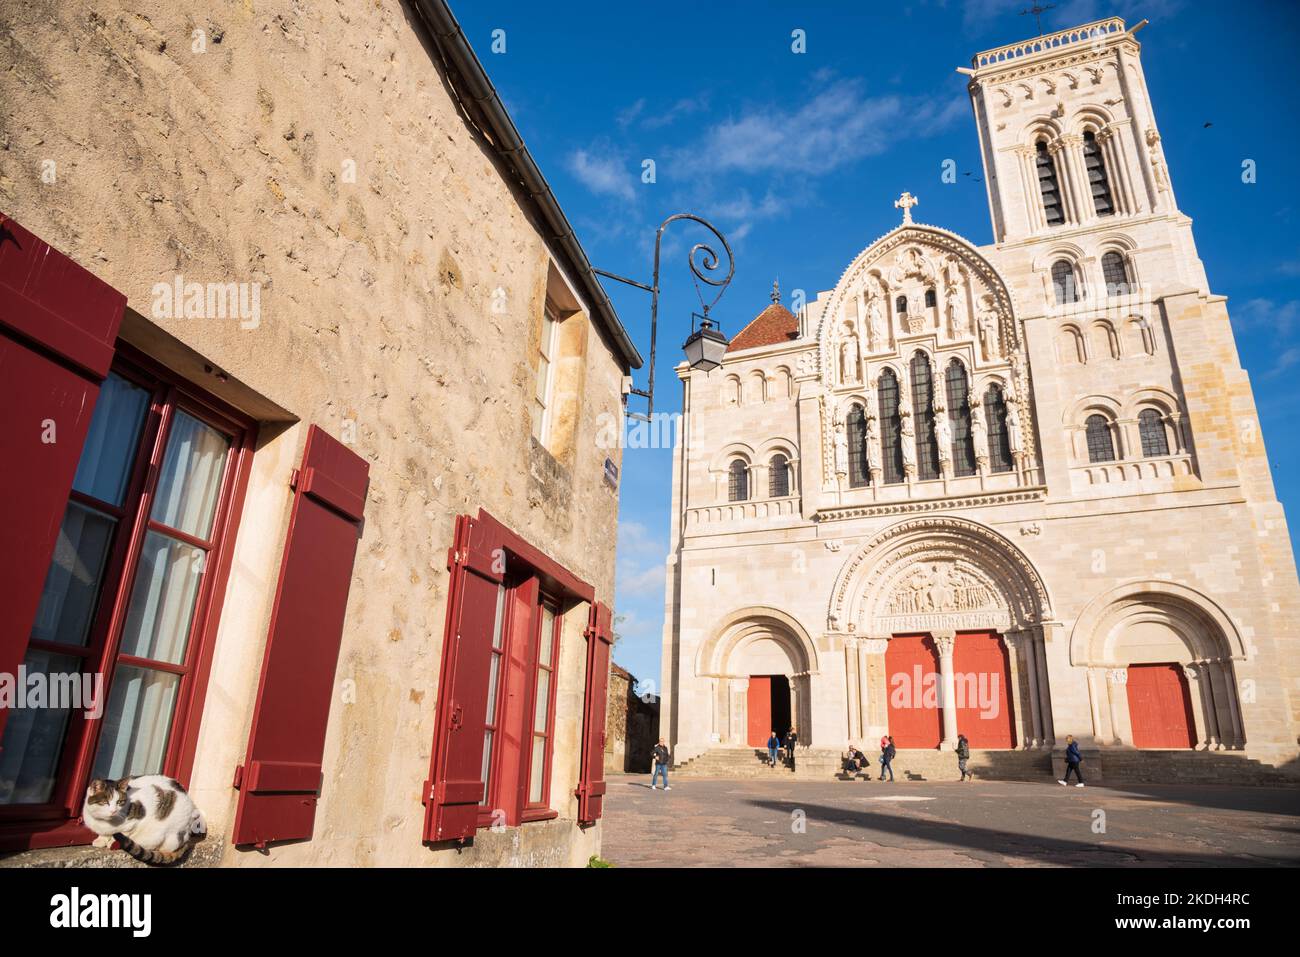 Cat welcoming visitors of famous  Vezelay abbey church in medieval village of Vezelay, Burgundy, France. Stock Photo